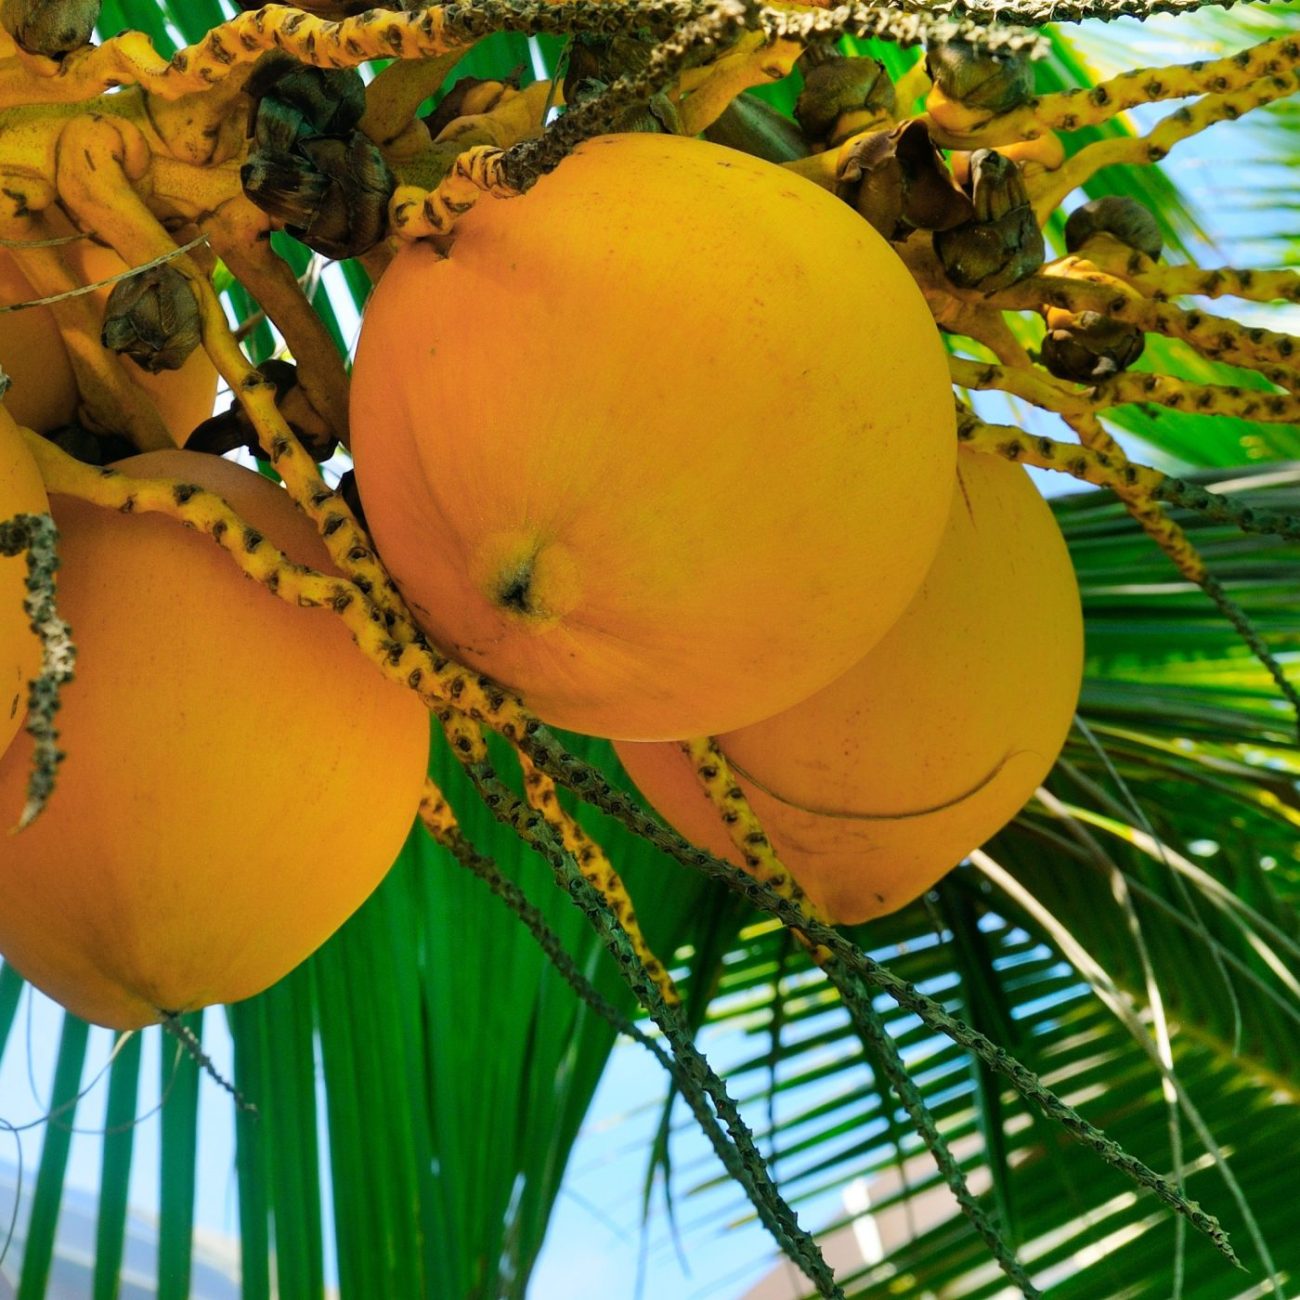 Tropical palm tree with yellow coconut against the blue sky. Travel to Sri Lanka. Wide photo.